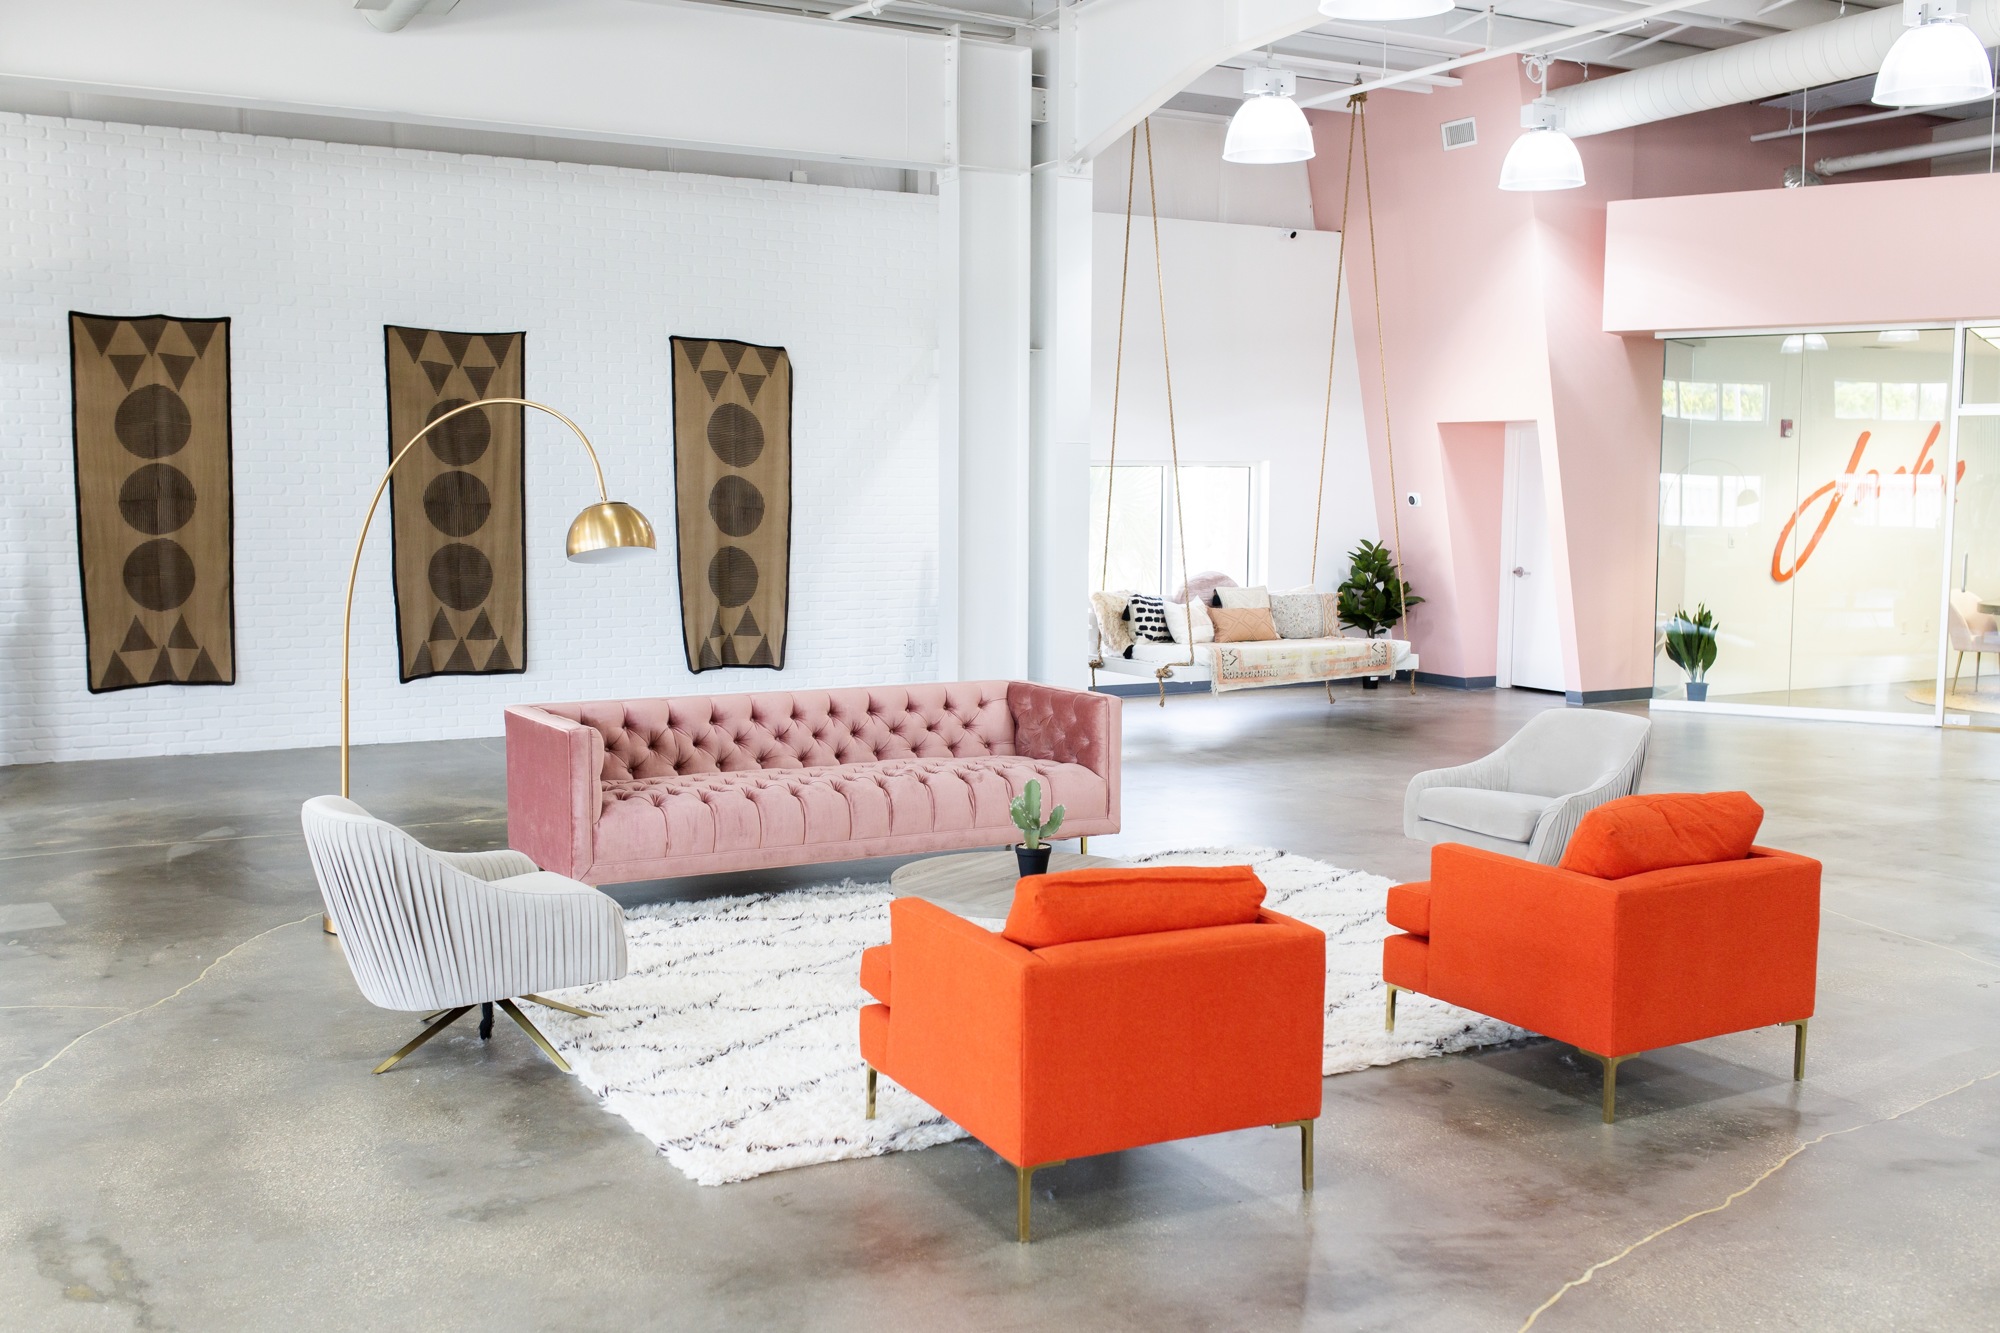 Courtesy. The Jackie headquarters in downtown Bradenton hosts in-person styling and events for women featuring different speakers and entrepreneurs.